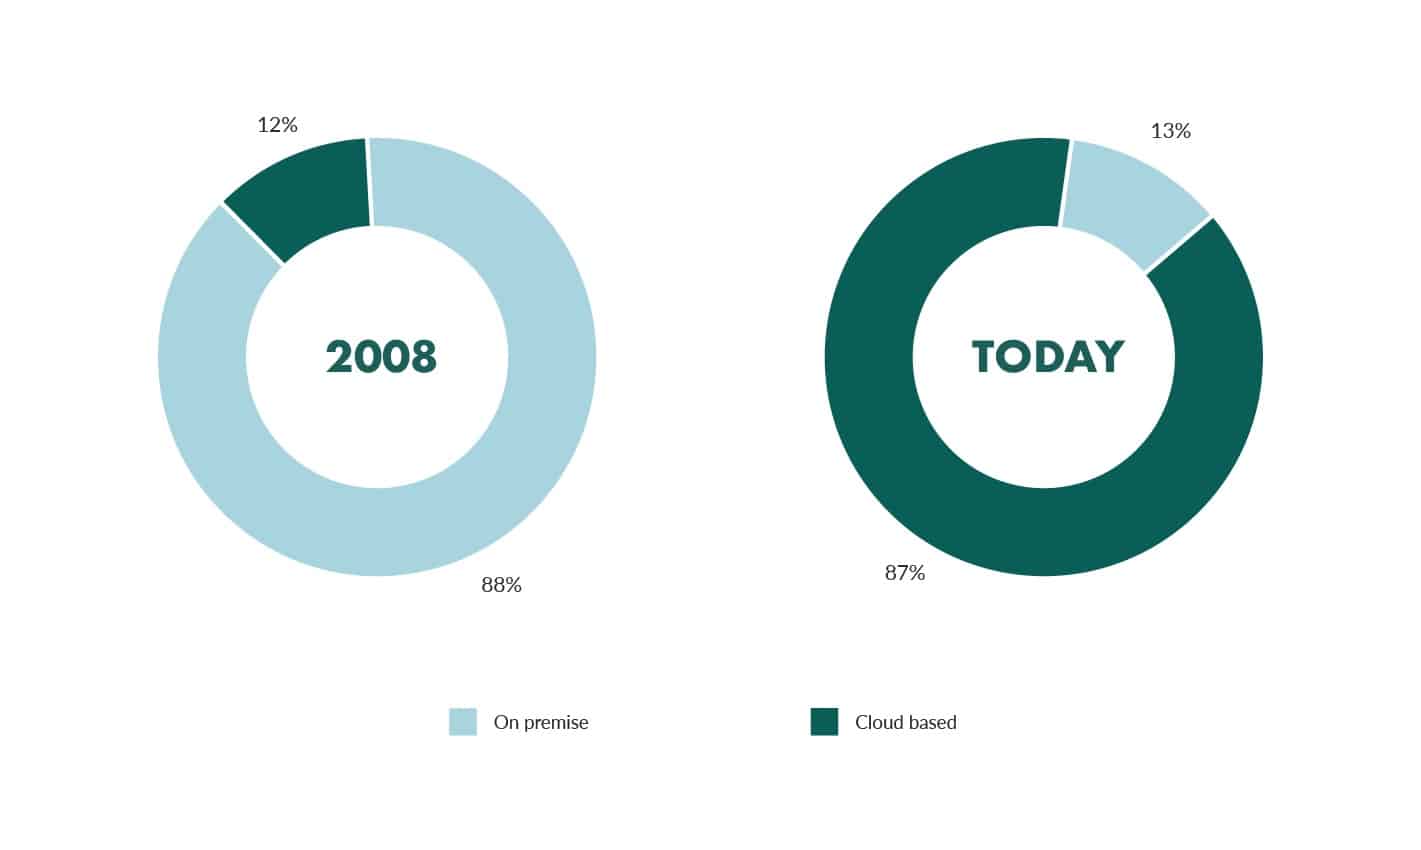 An infographic on cloud-based versus on-premise CRM solution preferences between 2008 and today by SuperOffice.